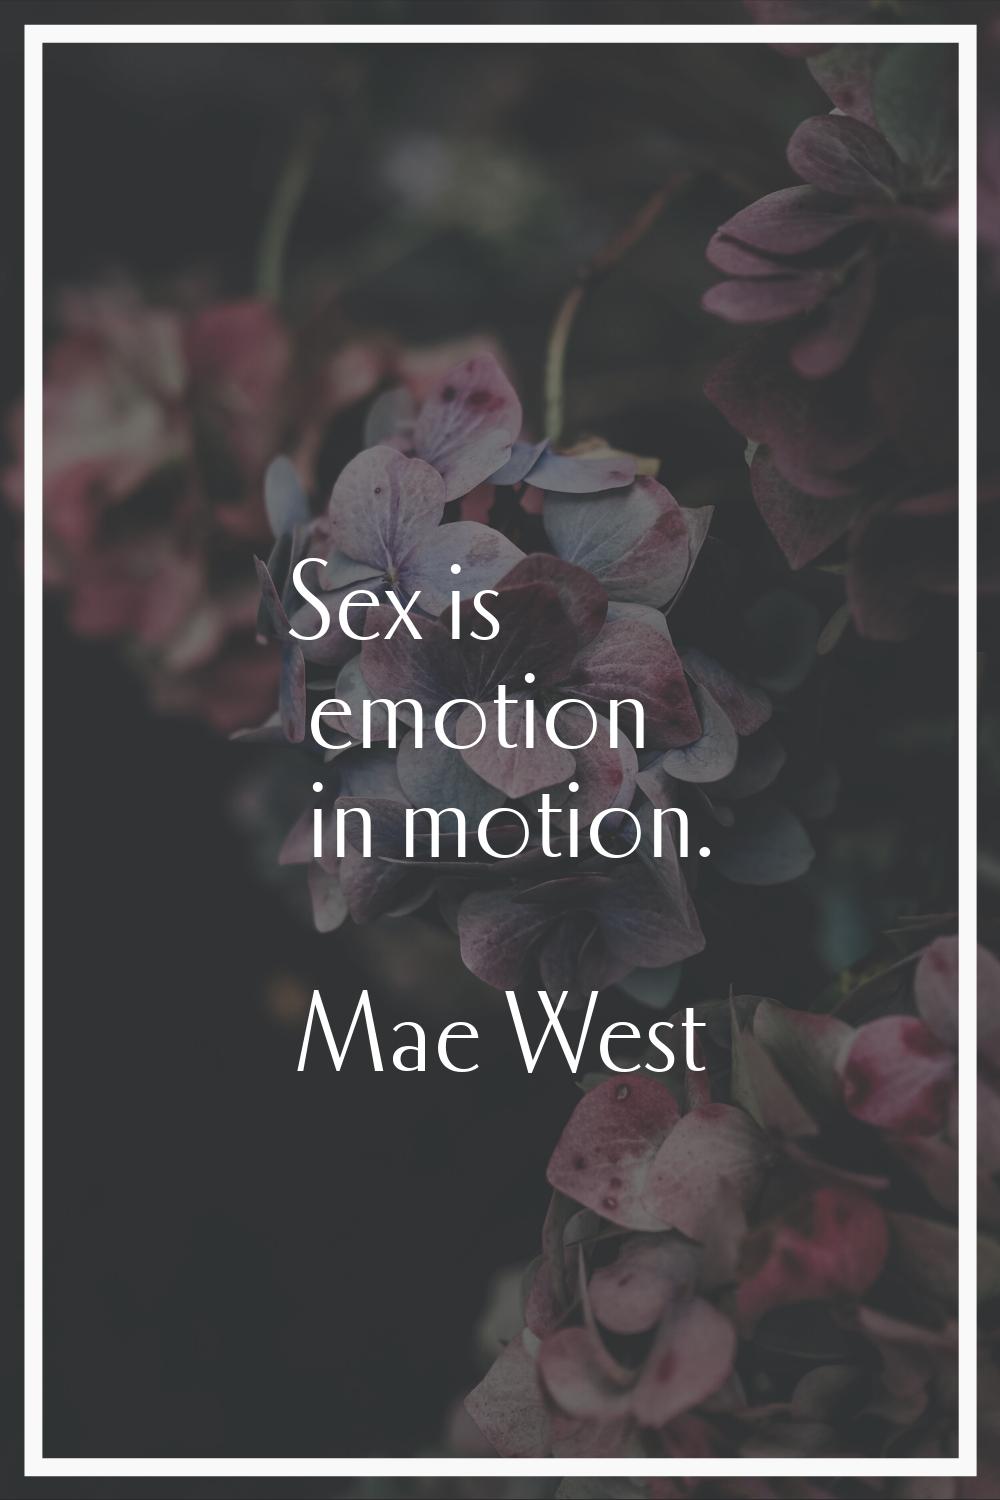 Sex is emotion in motion.